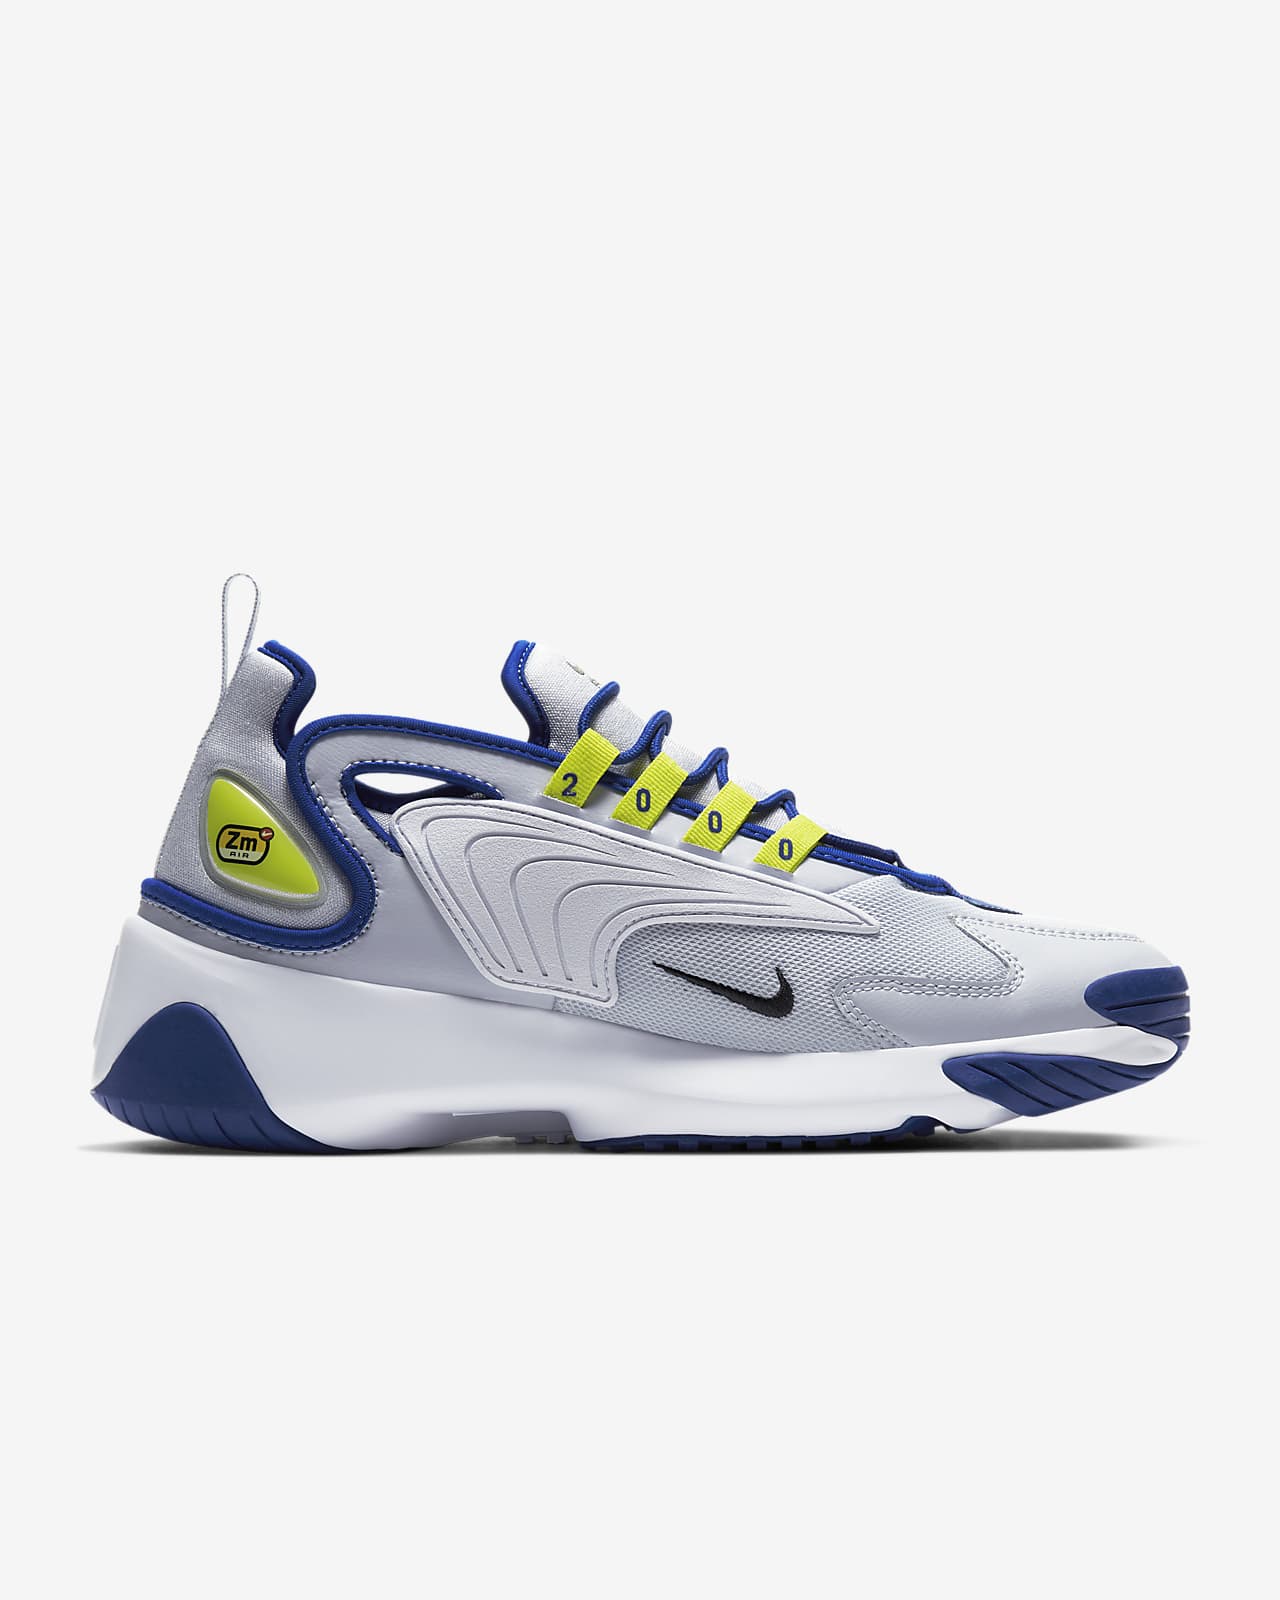 Sneakers Nike Zoom 2k Online Sale, UP TO 66% OFF